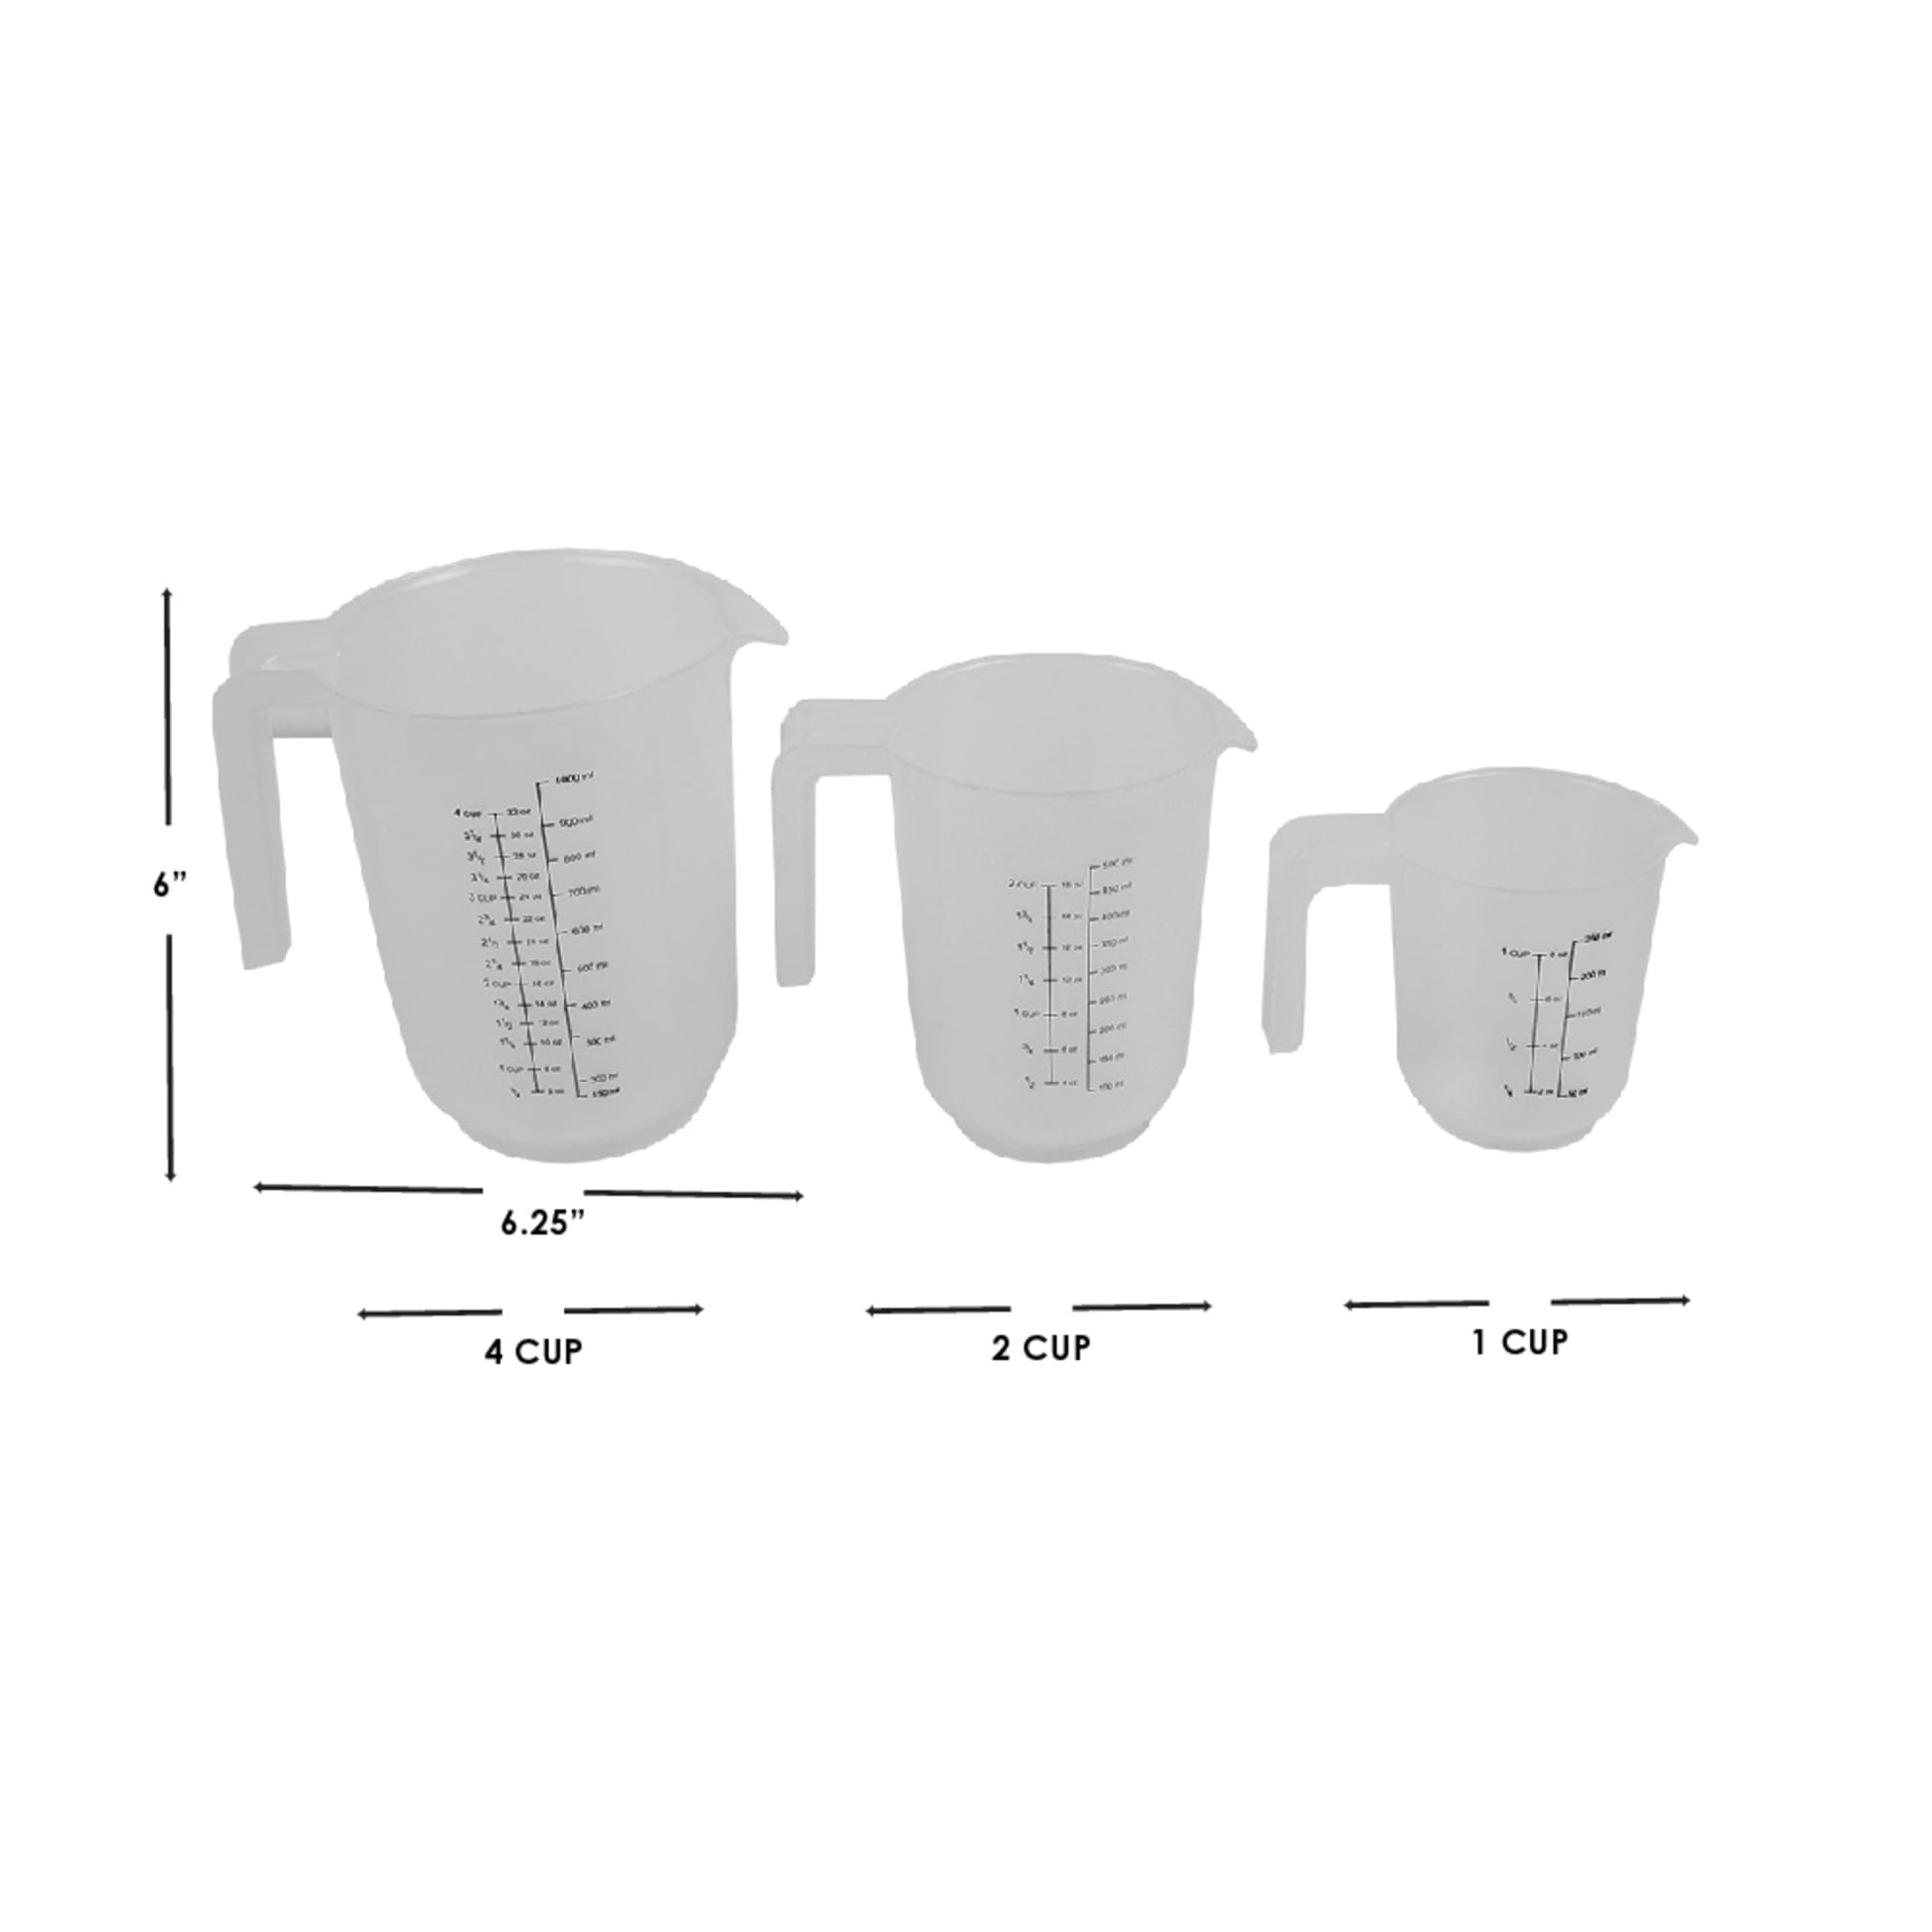  Measuring Cup Plastic Measure Cups - 3 Piece Liquid Measuring  Cup Set with Pitcher Handles, Clear Nesting Stackable measuring cups for  Kitchen, Multiple Measurement Scales,Dishwasher Safe: Home & Kitchen